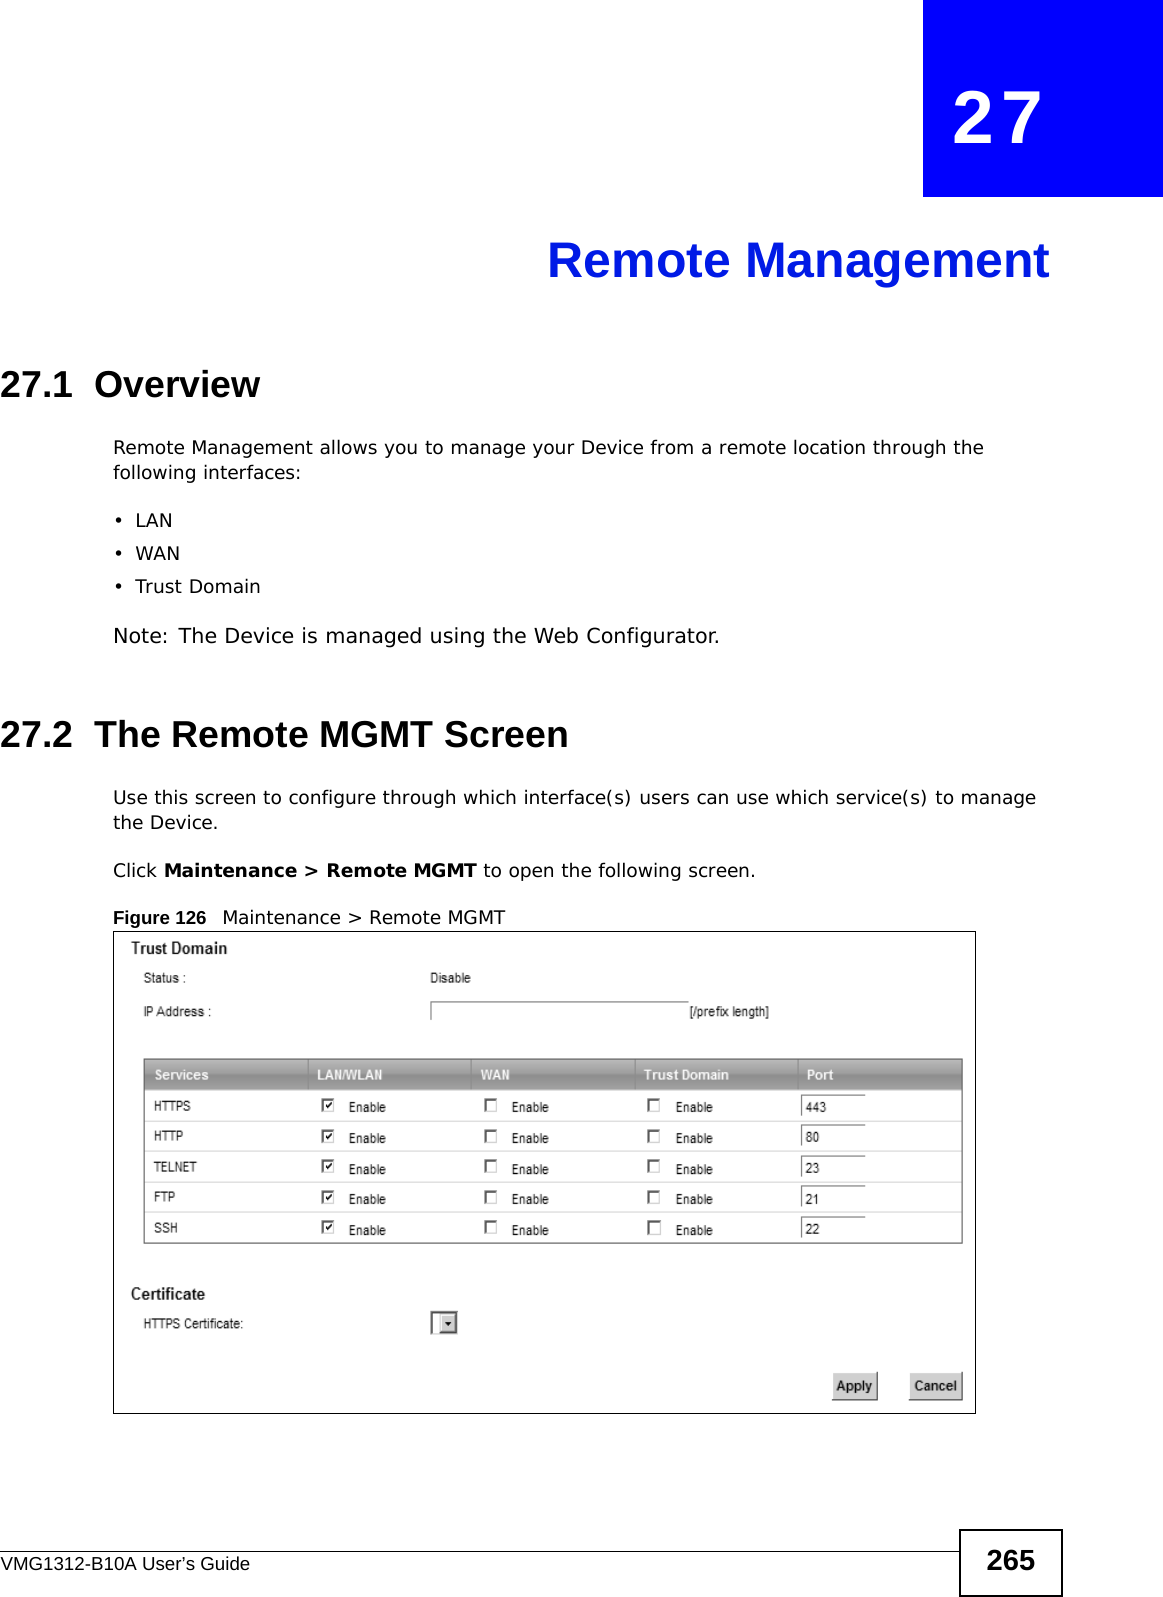 VMG1312-B10A User’s Guide 265CHAPTER   27Remote Management27.1  OverviewRemote Management allows you to manage your Device from a remote location through the following interfaces:•LAN•WAN•Trust DomainNote: The Device is managed using the Web Configurator.27.2  The Remote MGMT ScreenUse this screen to configure through which interface(s) users can use which service(s) to manage the Device.Click Maintenance &gt; Remote MGMT to open the following screen. Figure 126   Maintenance &gt; Remote MGMT 